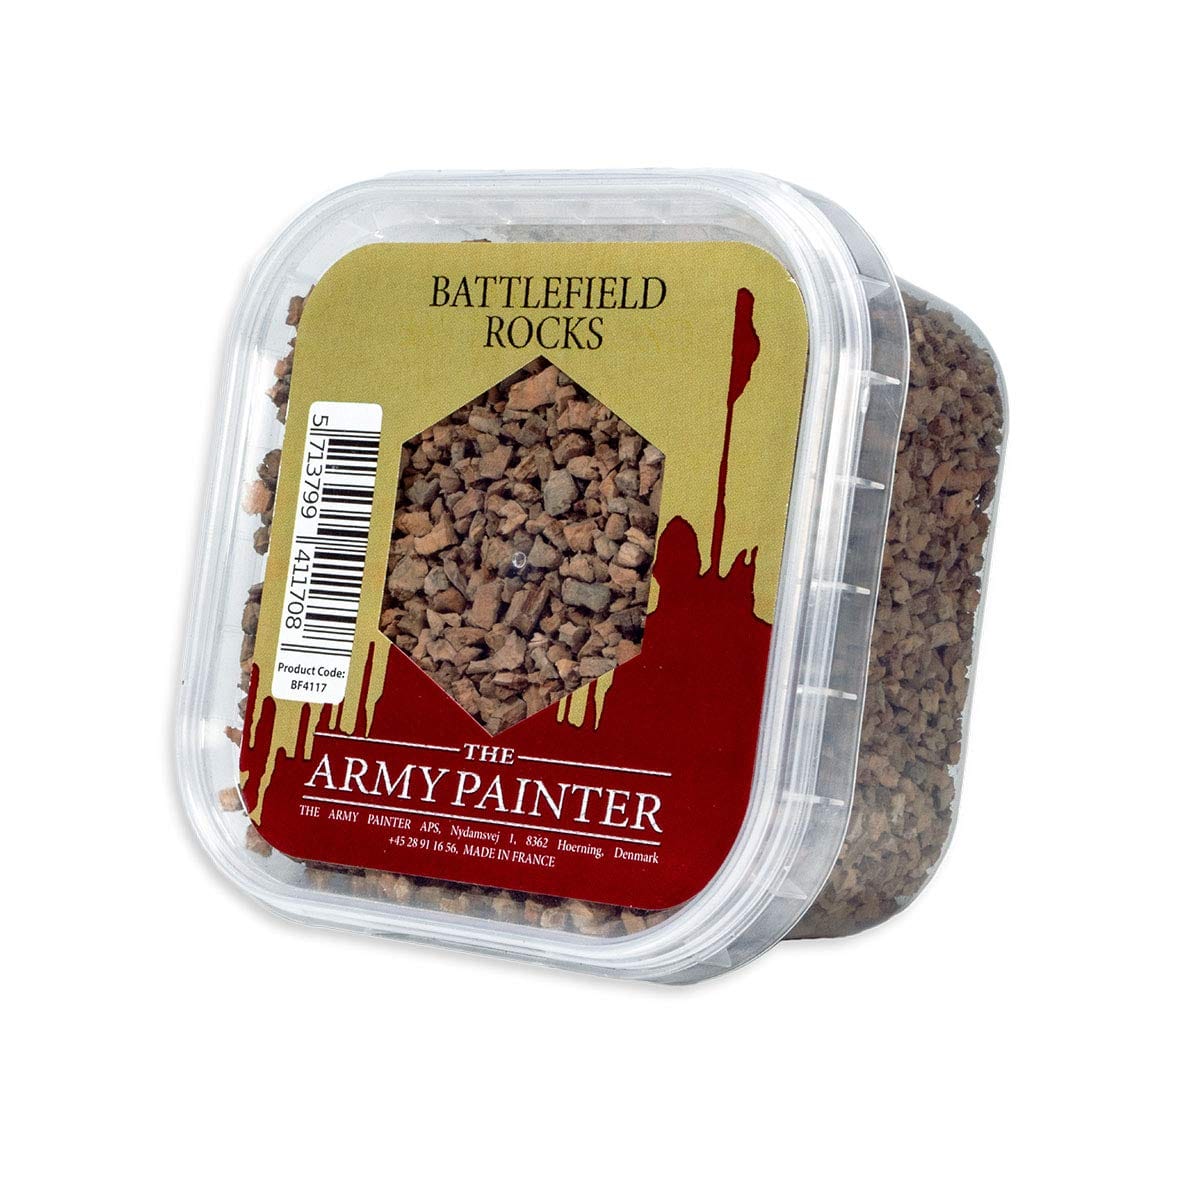 The Army Painter Accessories The Army Painter Battlefields: Battlefield Rocks